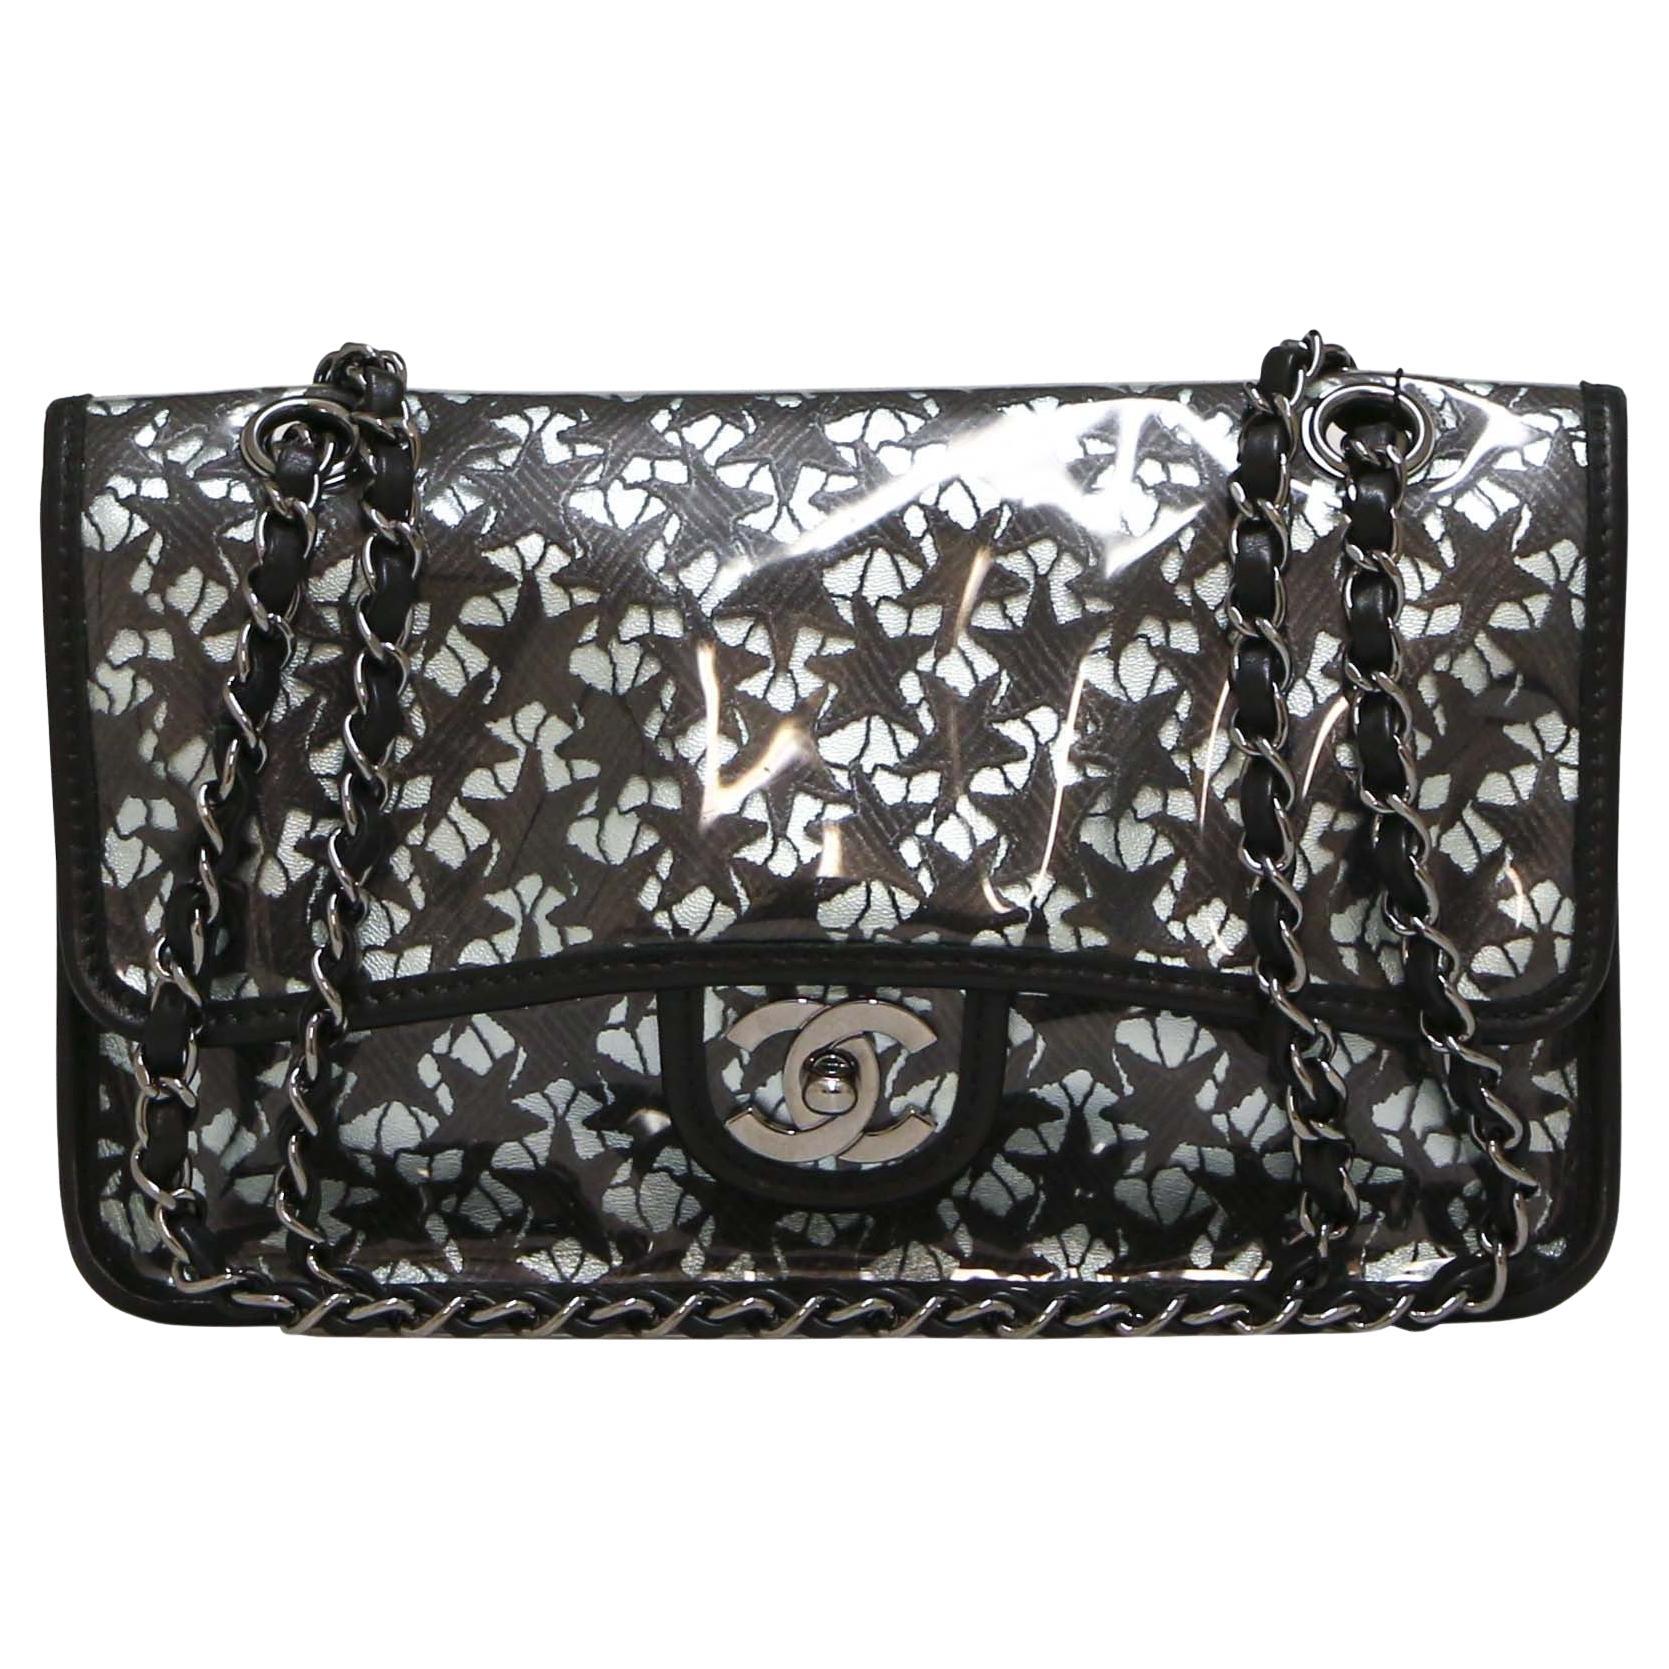 CHANEL Timeless bag in transparent PVC with black stars